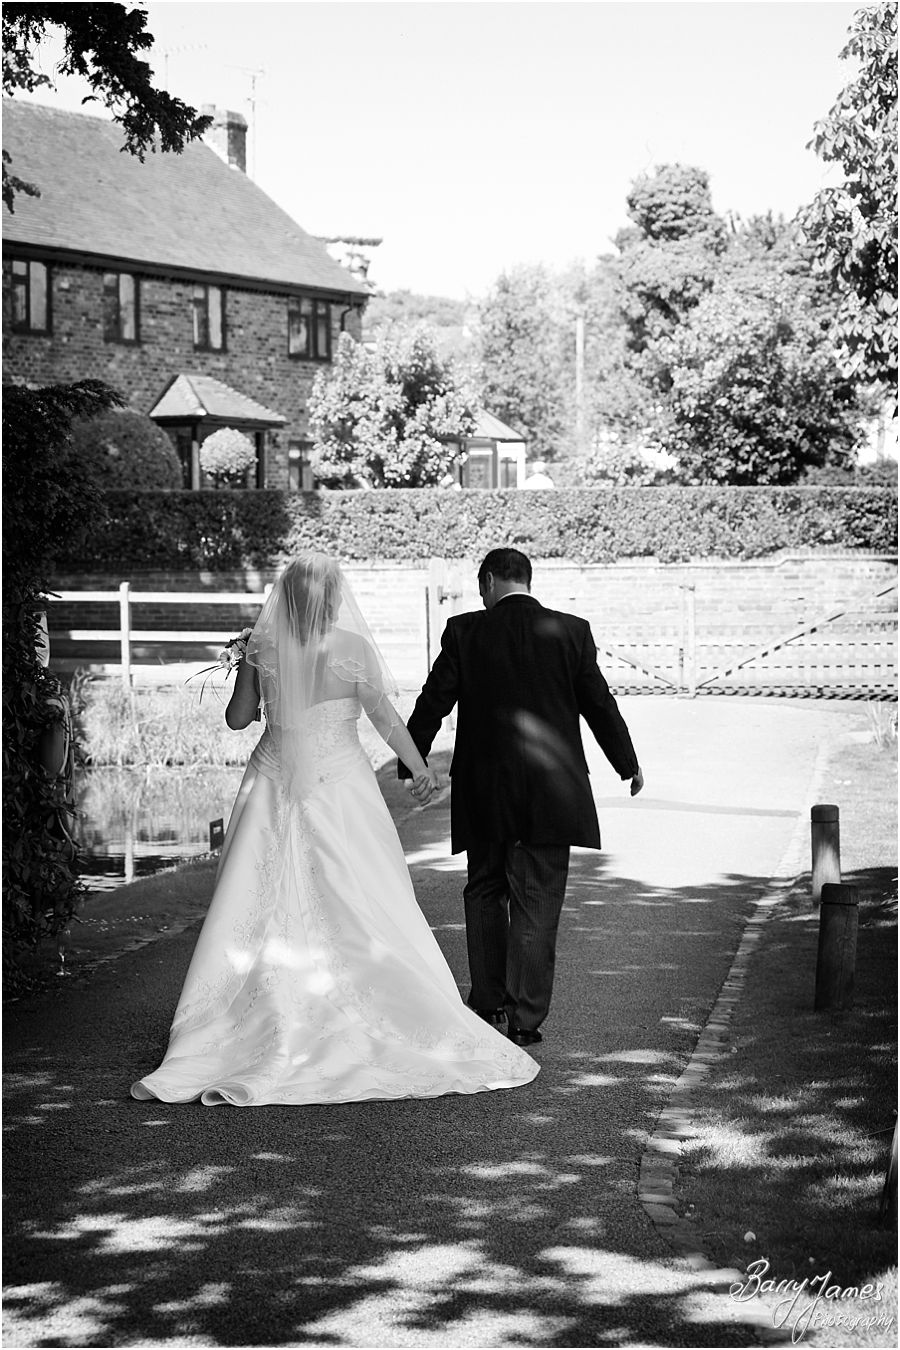 Creative wedding photographers at The Moat House in Acton Trussell by Venue Recommended Wedding Photographer Barry James